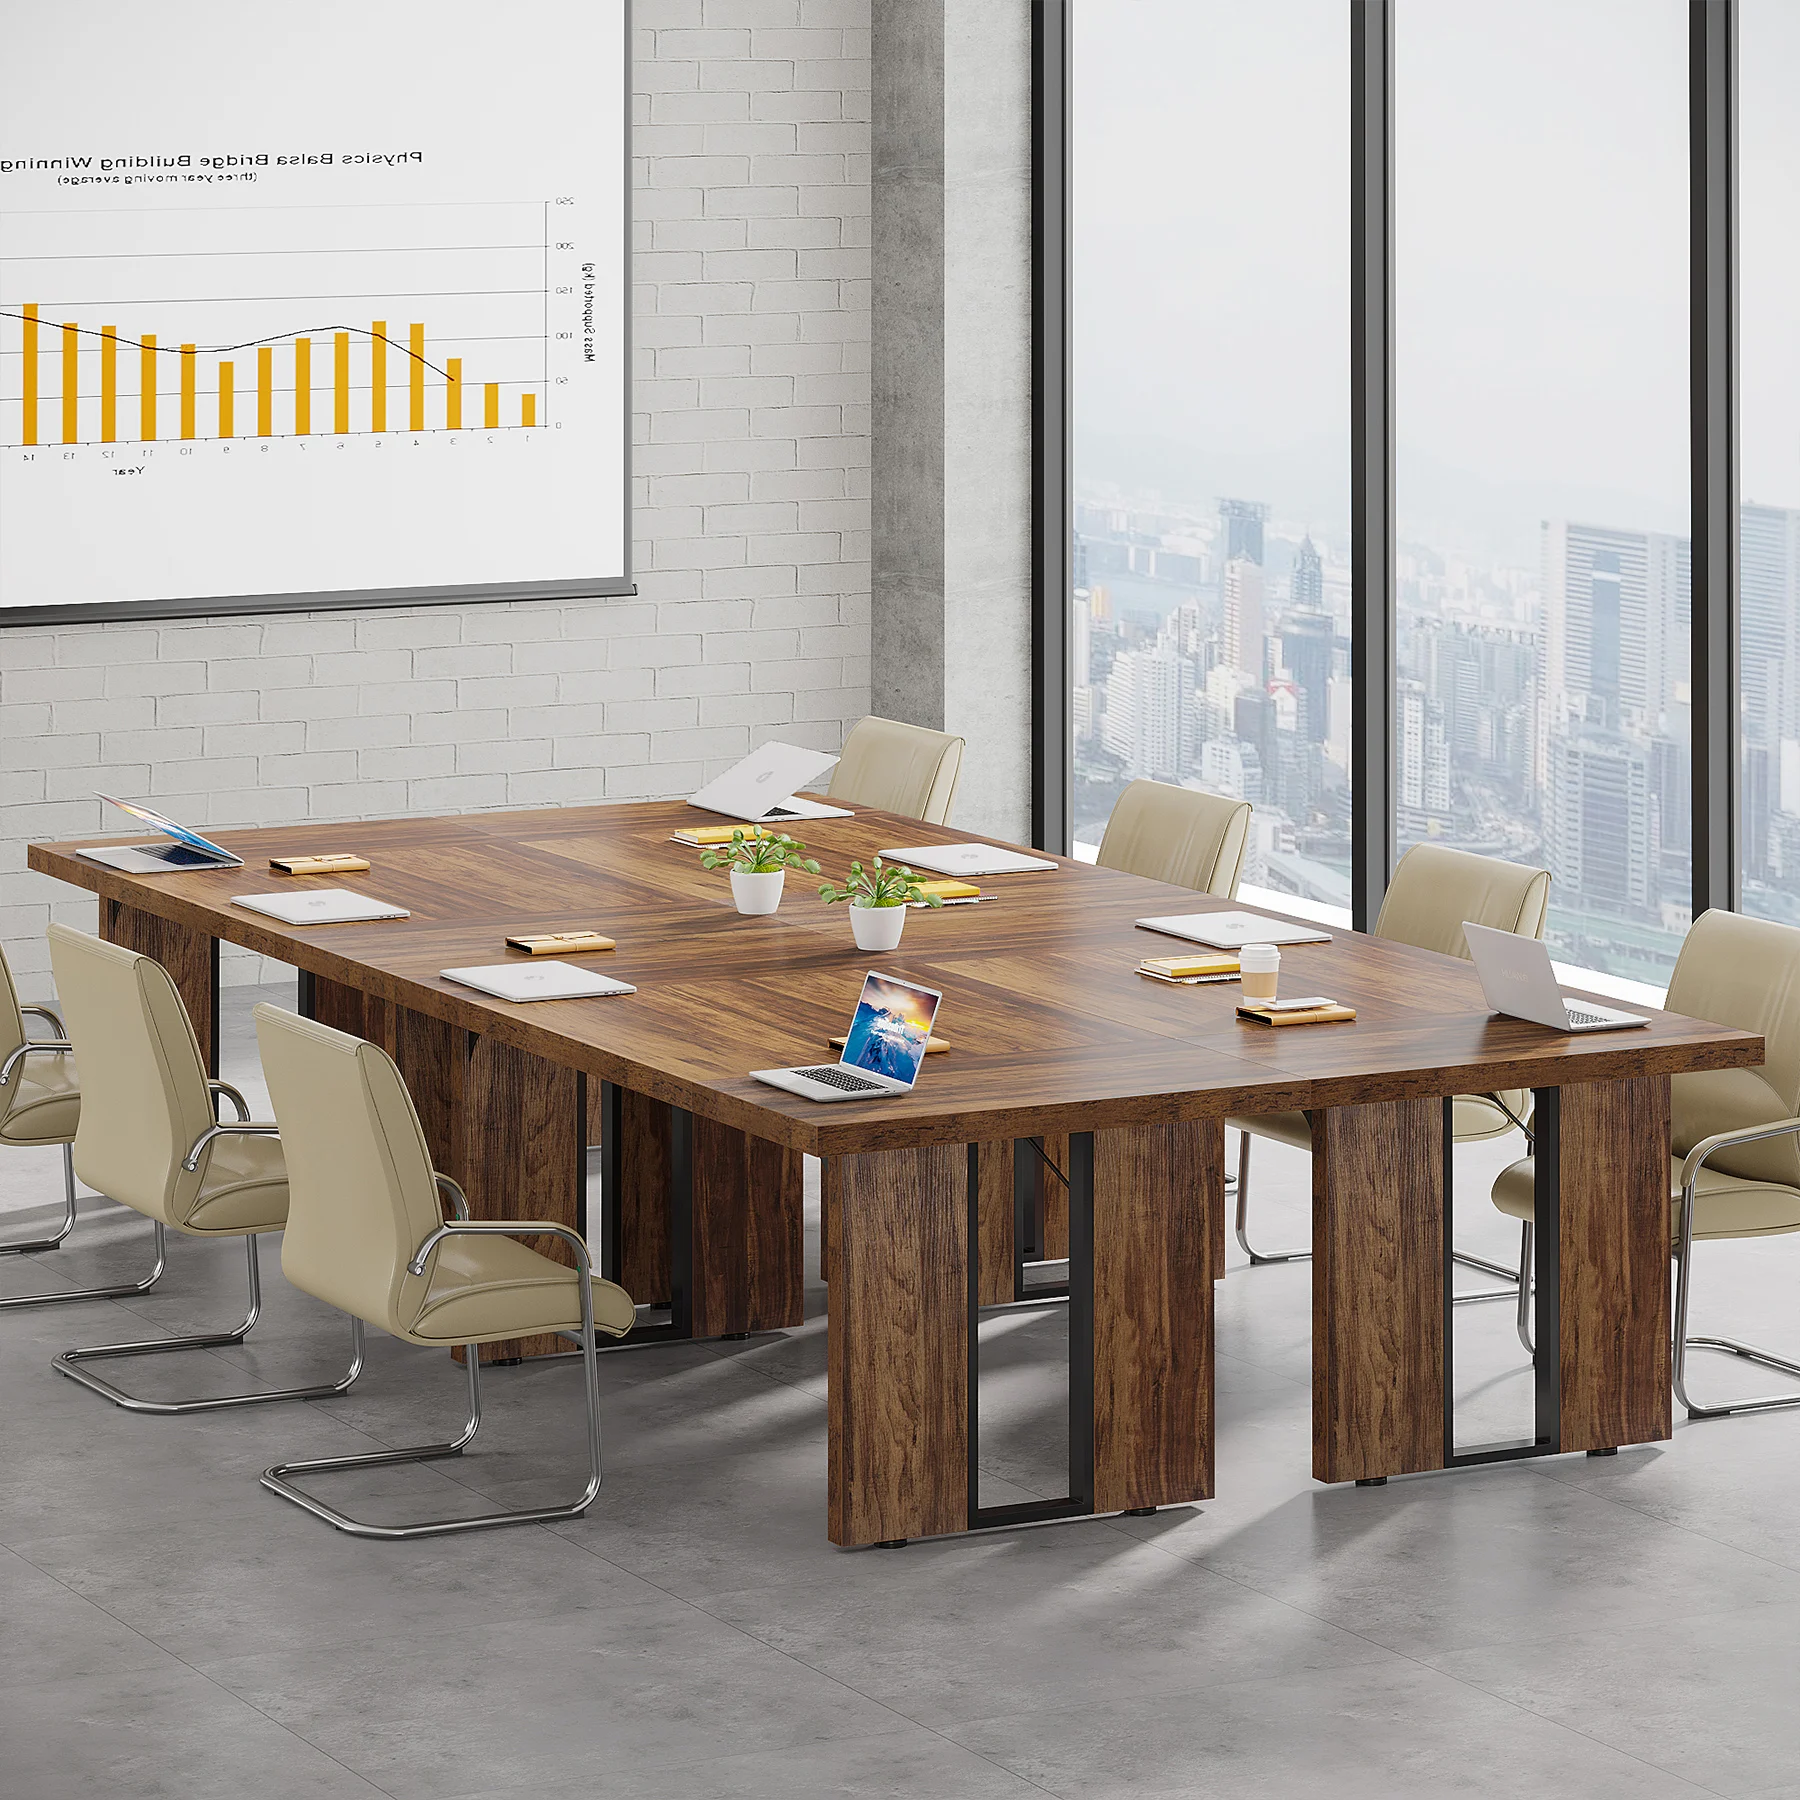 Tribesigns Mdf Furniture Contemporary Executive Office Desk Conference Table Home Office Furniture Design